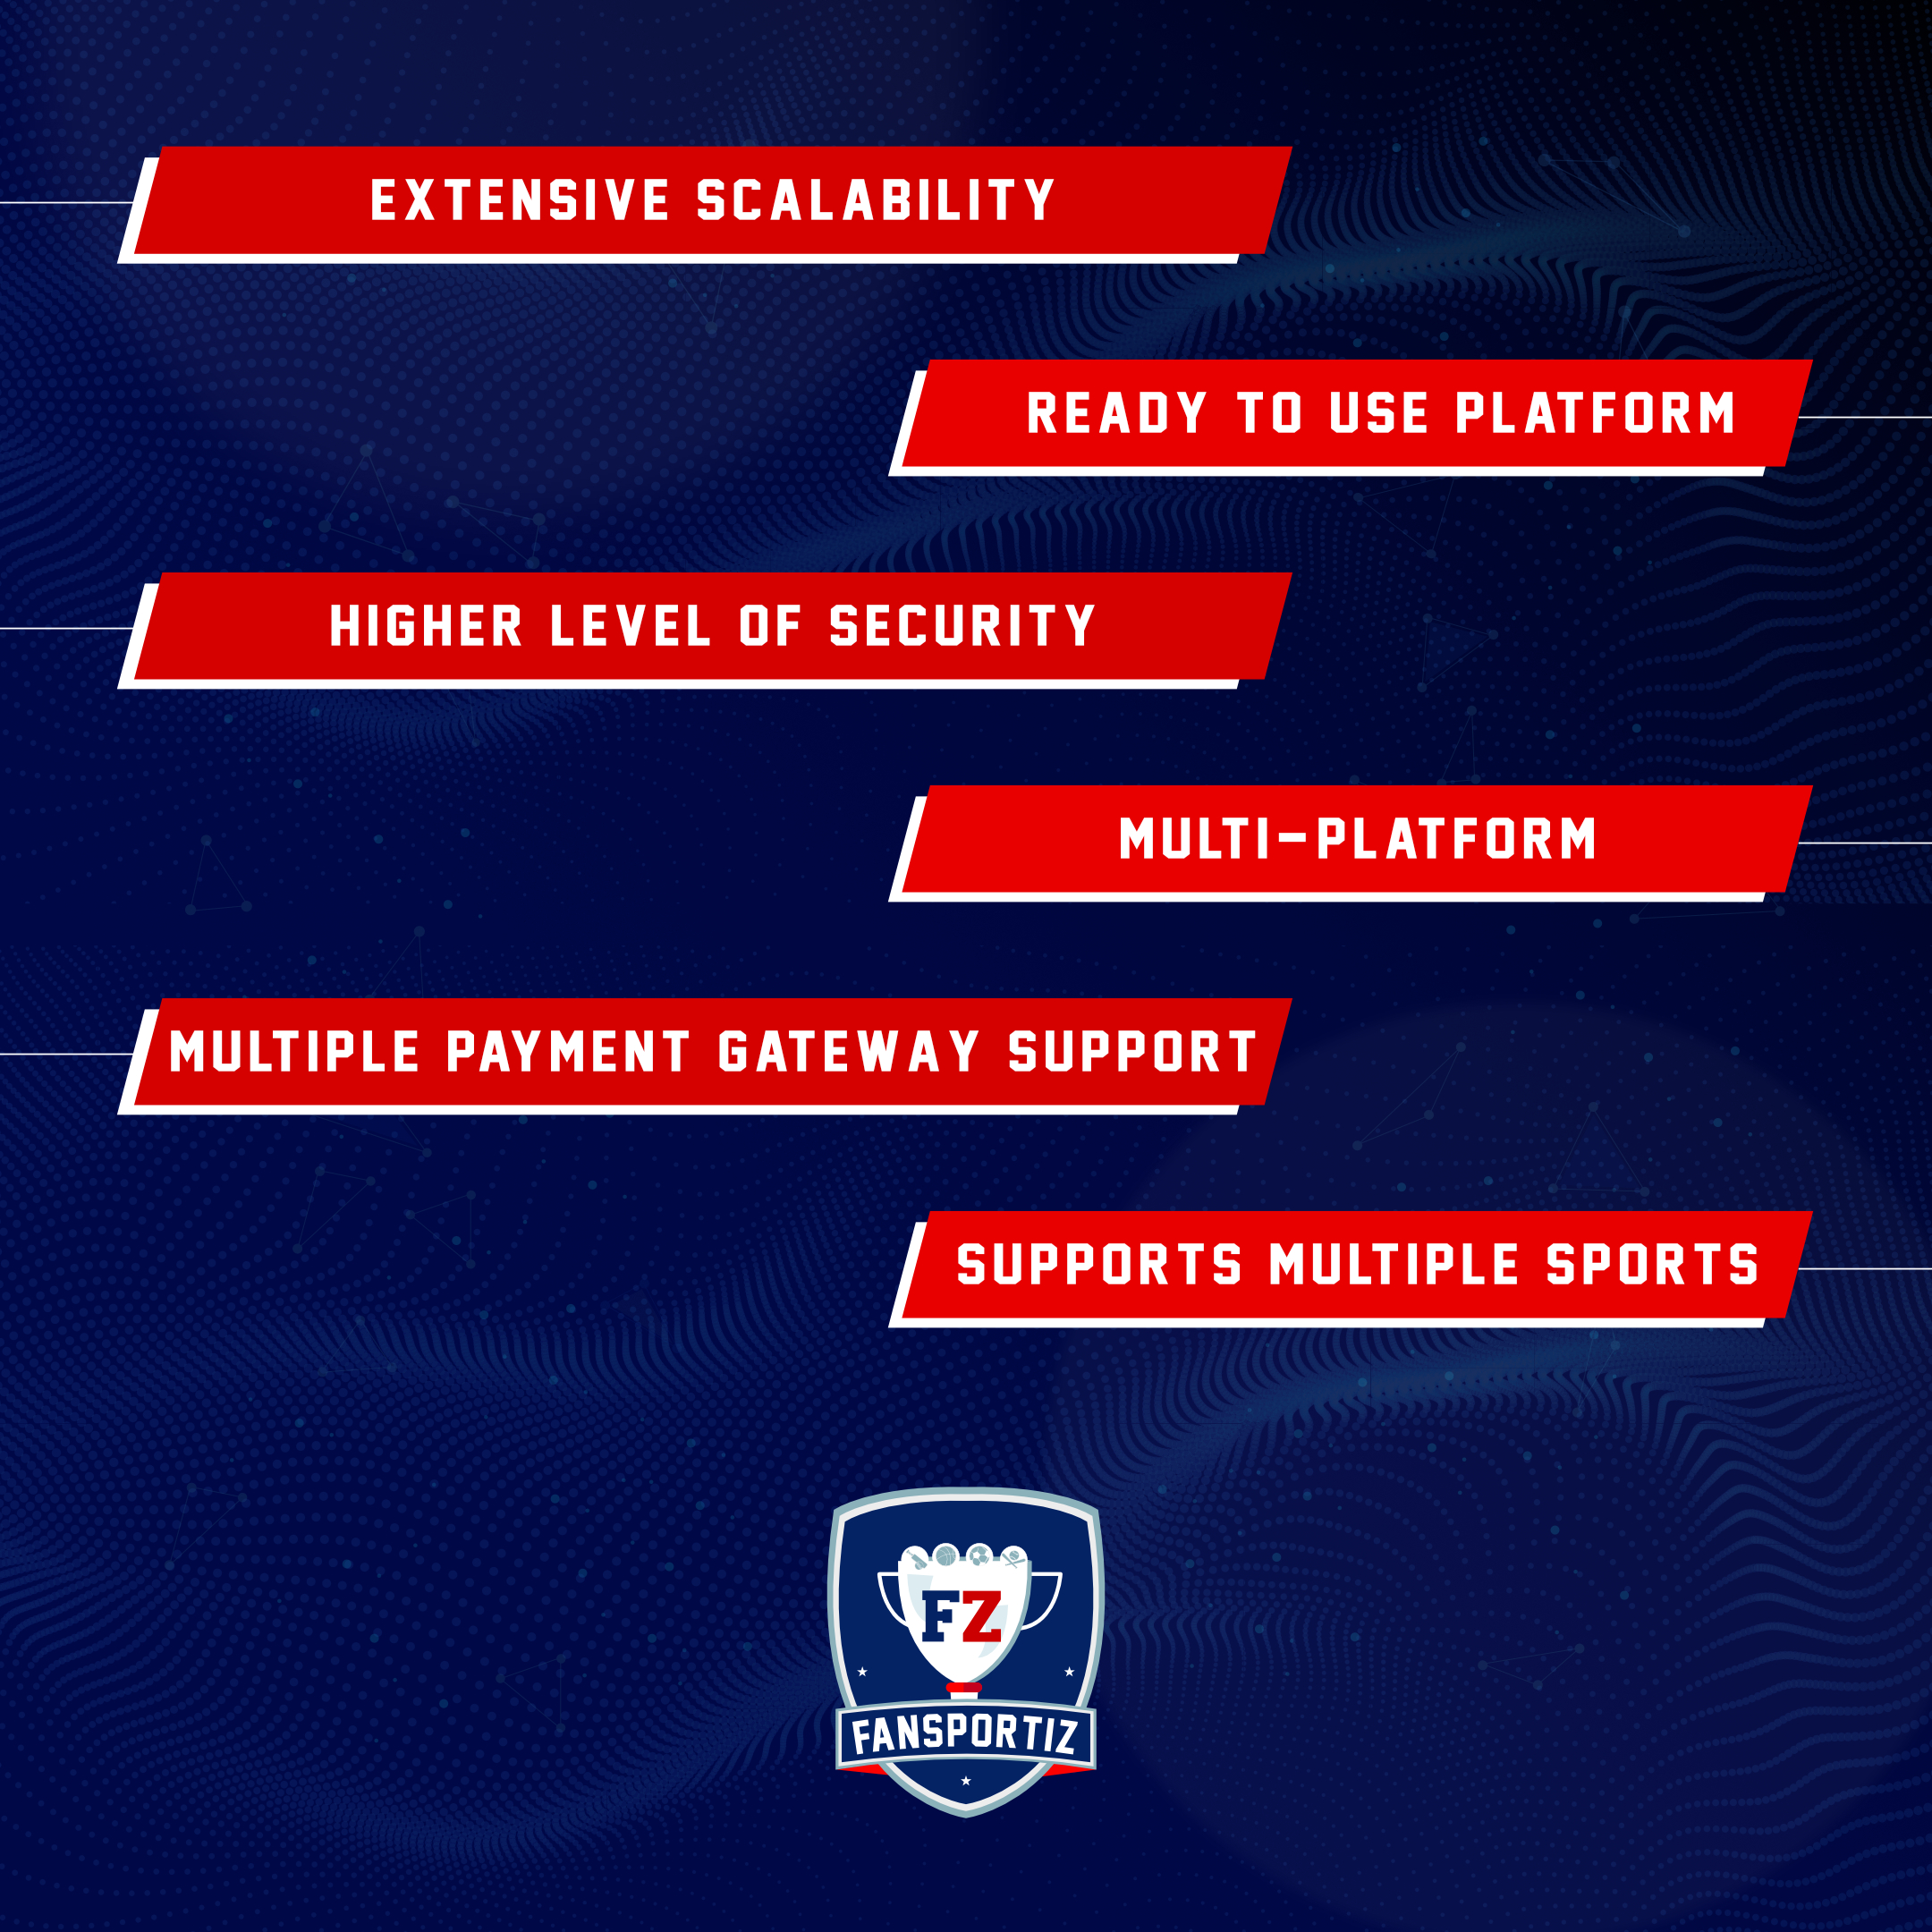 &gt; EXTENSIVE SCALABILITY
/ READY TO USE PLATFORM
| HIGHER LEVEL OF SECURITY
MULTI-PLATFORM
[MULTIPLE PAYMENT GATEWAY SUPPORT
/ SUPPORTS MULTIPLE SPORTS